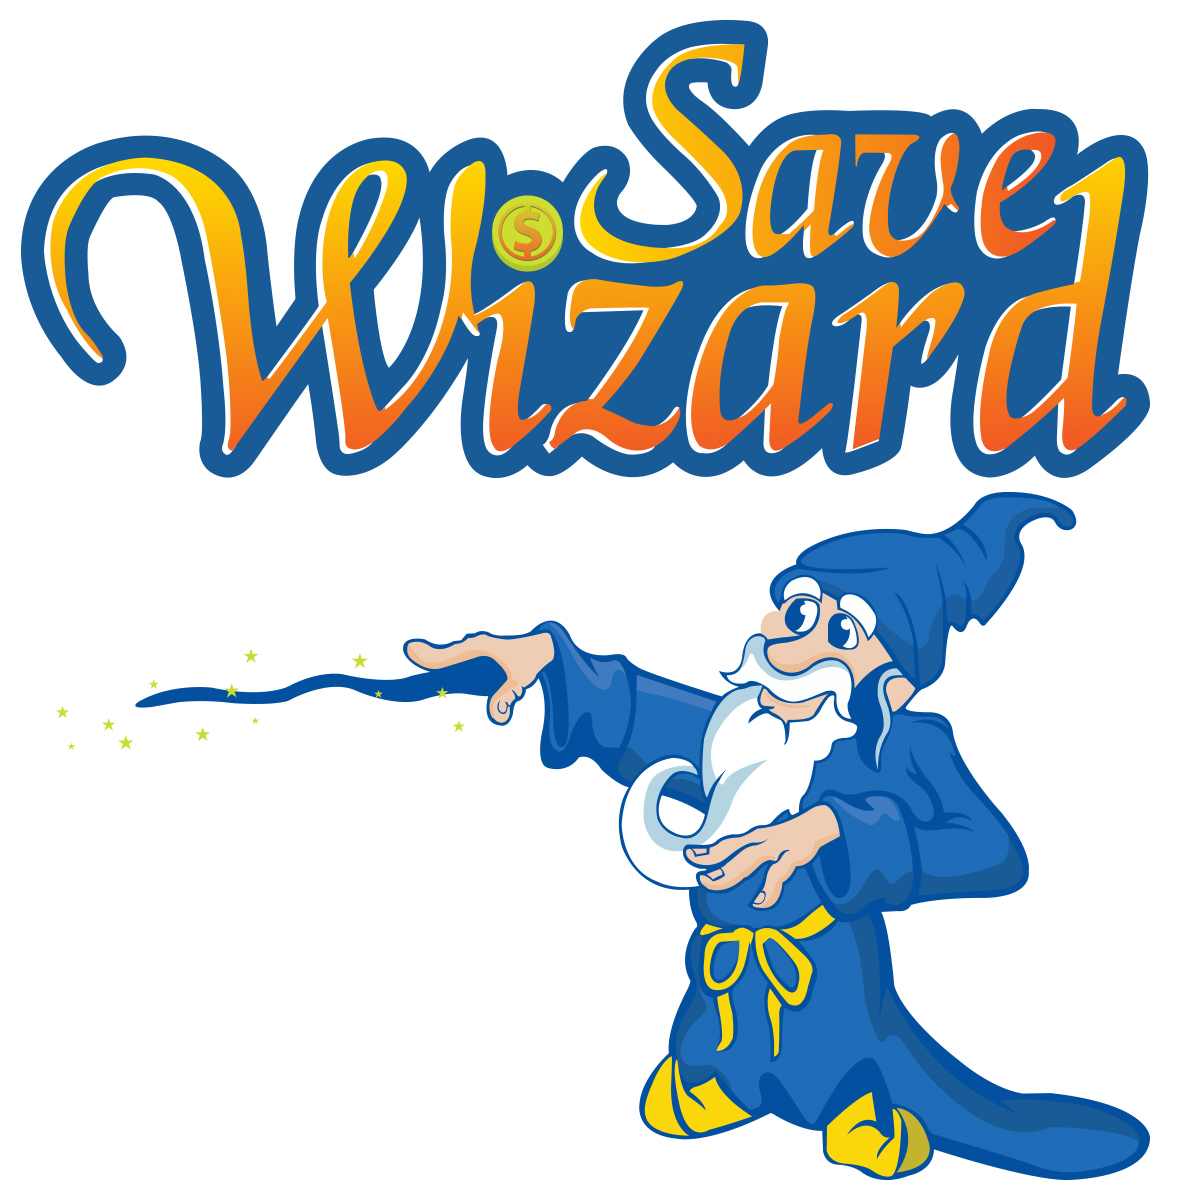 PS4 Save Wizard Cracked